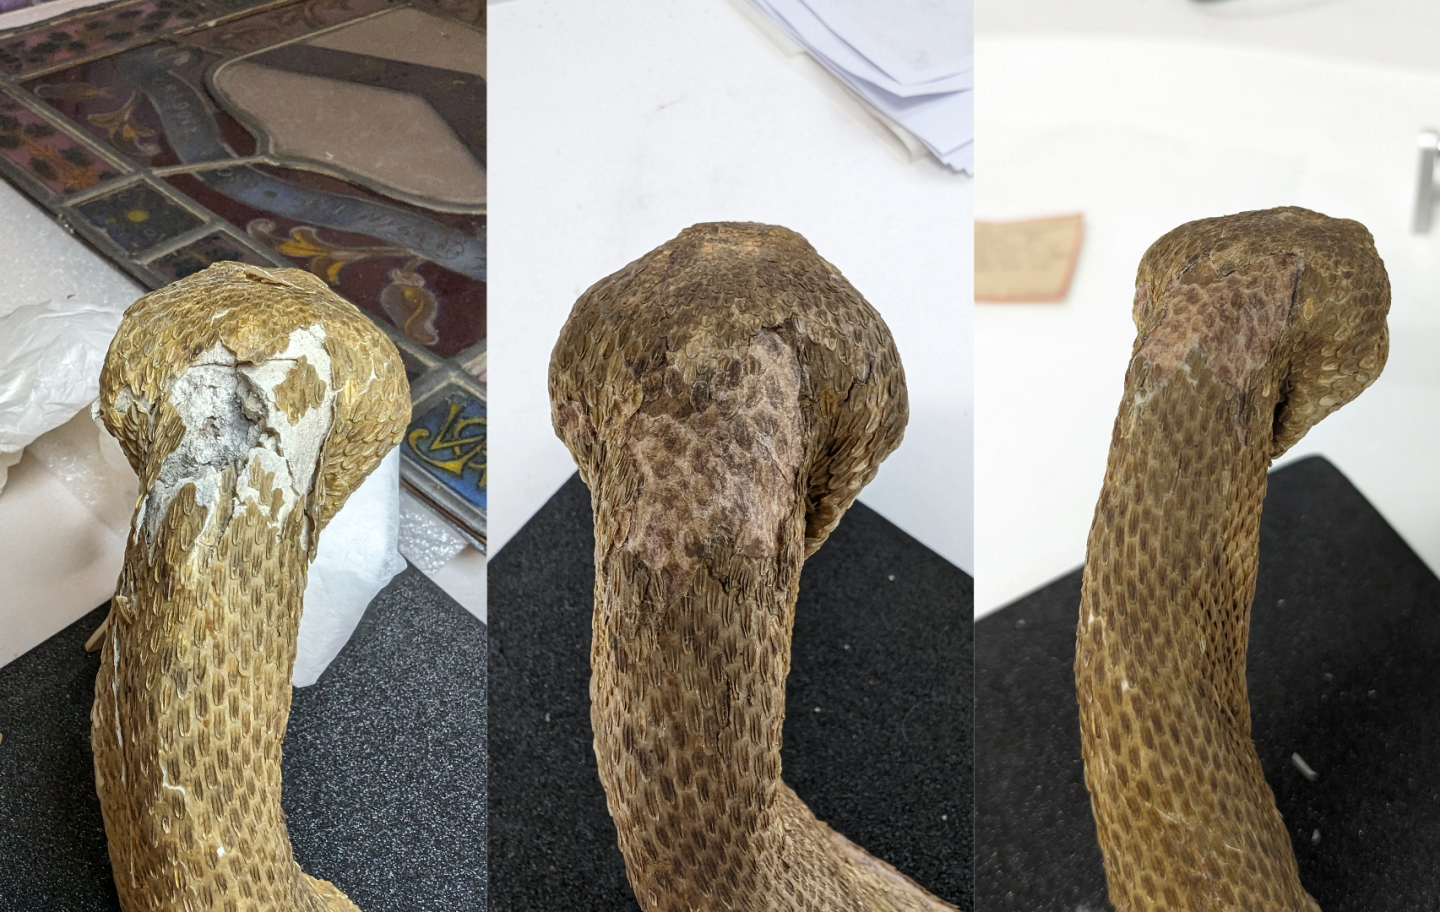 Snake's neck comparison, before, during and after treatment